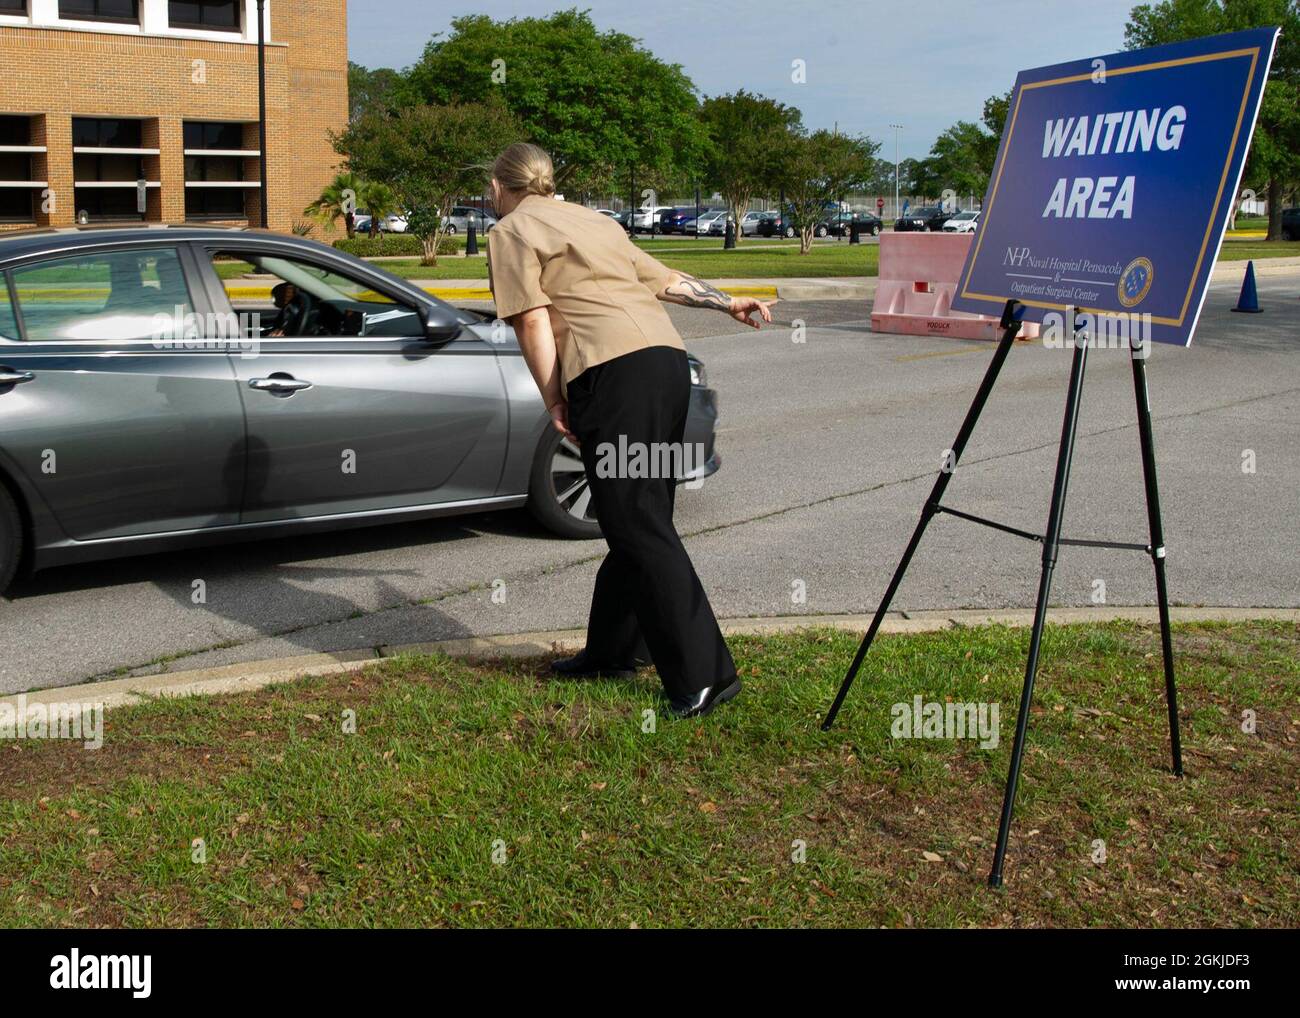 PENSACOLA, Fla. (May 1, 2021) Hospitalman Mary Reynolds, a native of Blountstown, Florida, directs patients to the waiting area where they are monitored for 15 minutes after they have received a COVID-19 vaccination during a drive-thru COVID-19 vaccine clinic at Naval Hospital Pensacola. The drive-thru vaccination clinic was prepared to provide a COVID-19 vaccine to more than 600 TRICARE beneficiaries age 16 and older. Stock Photo